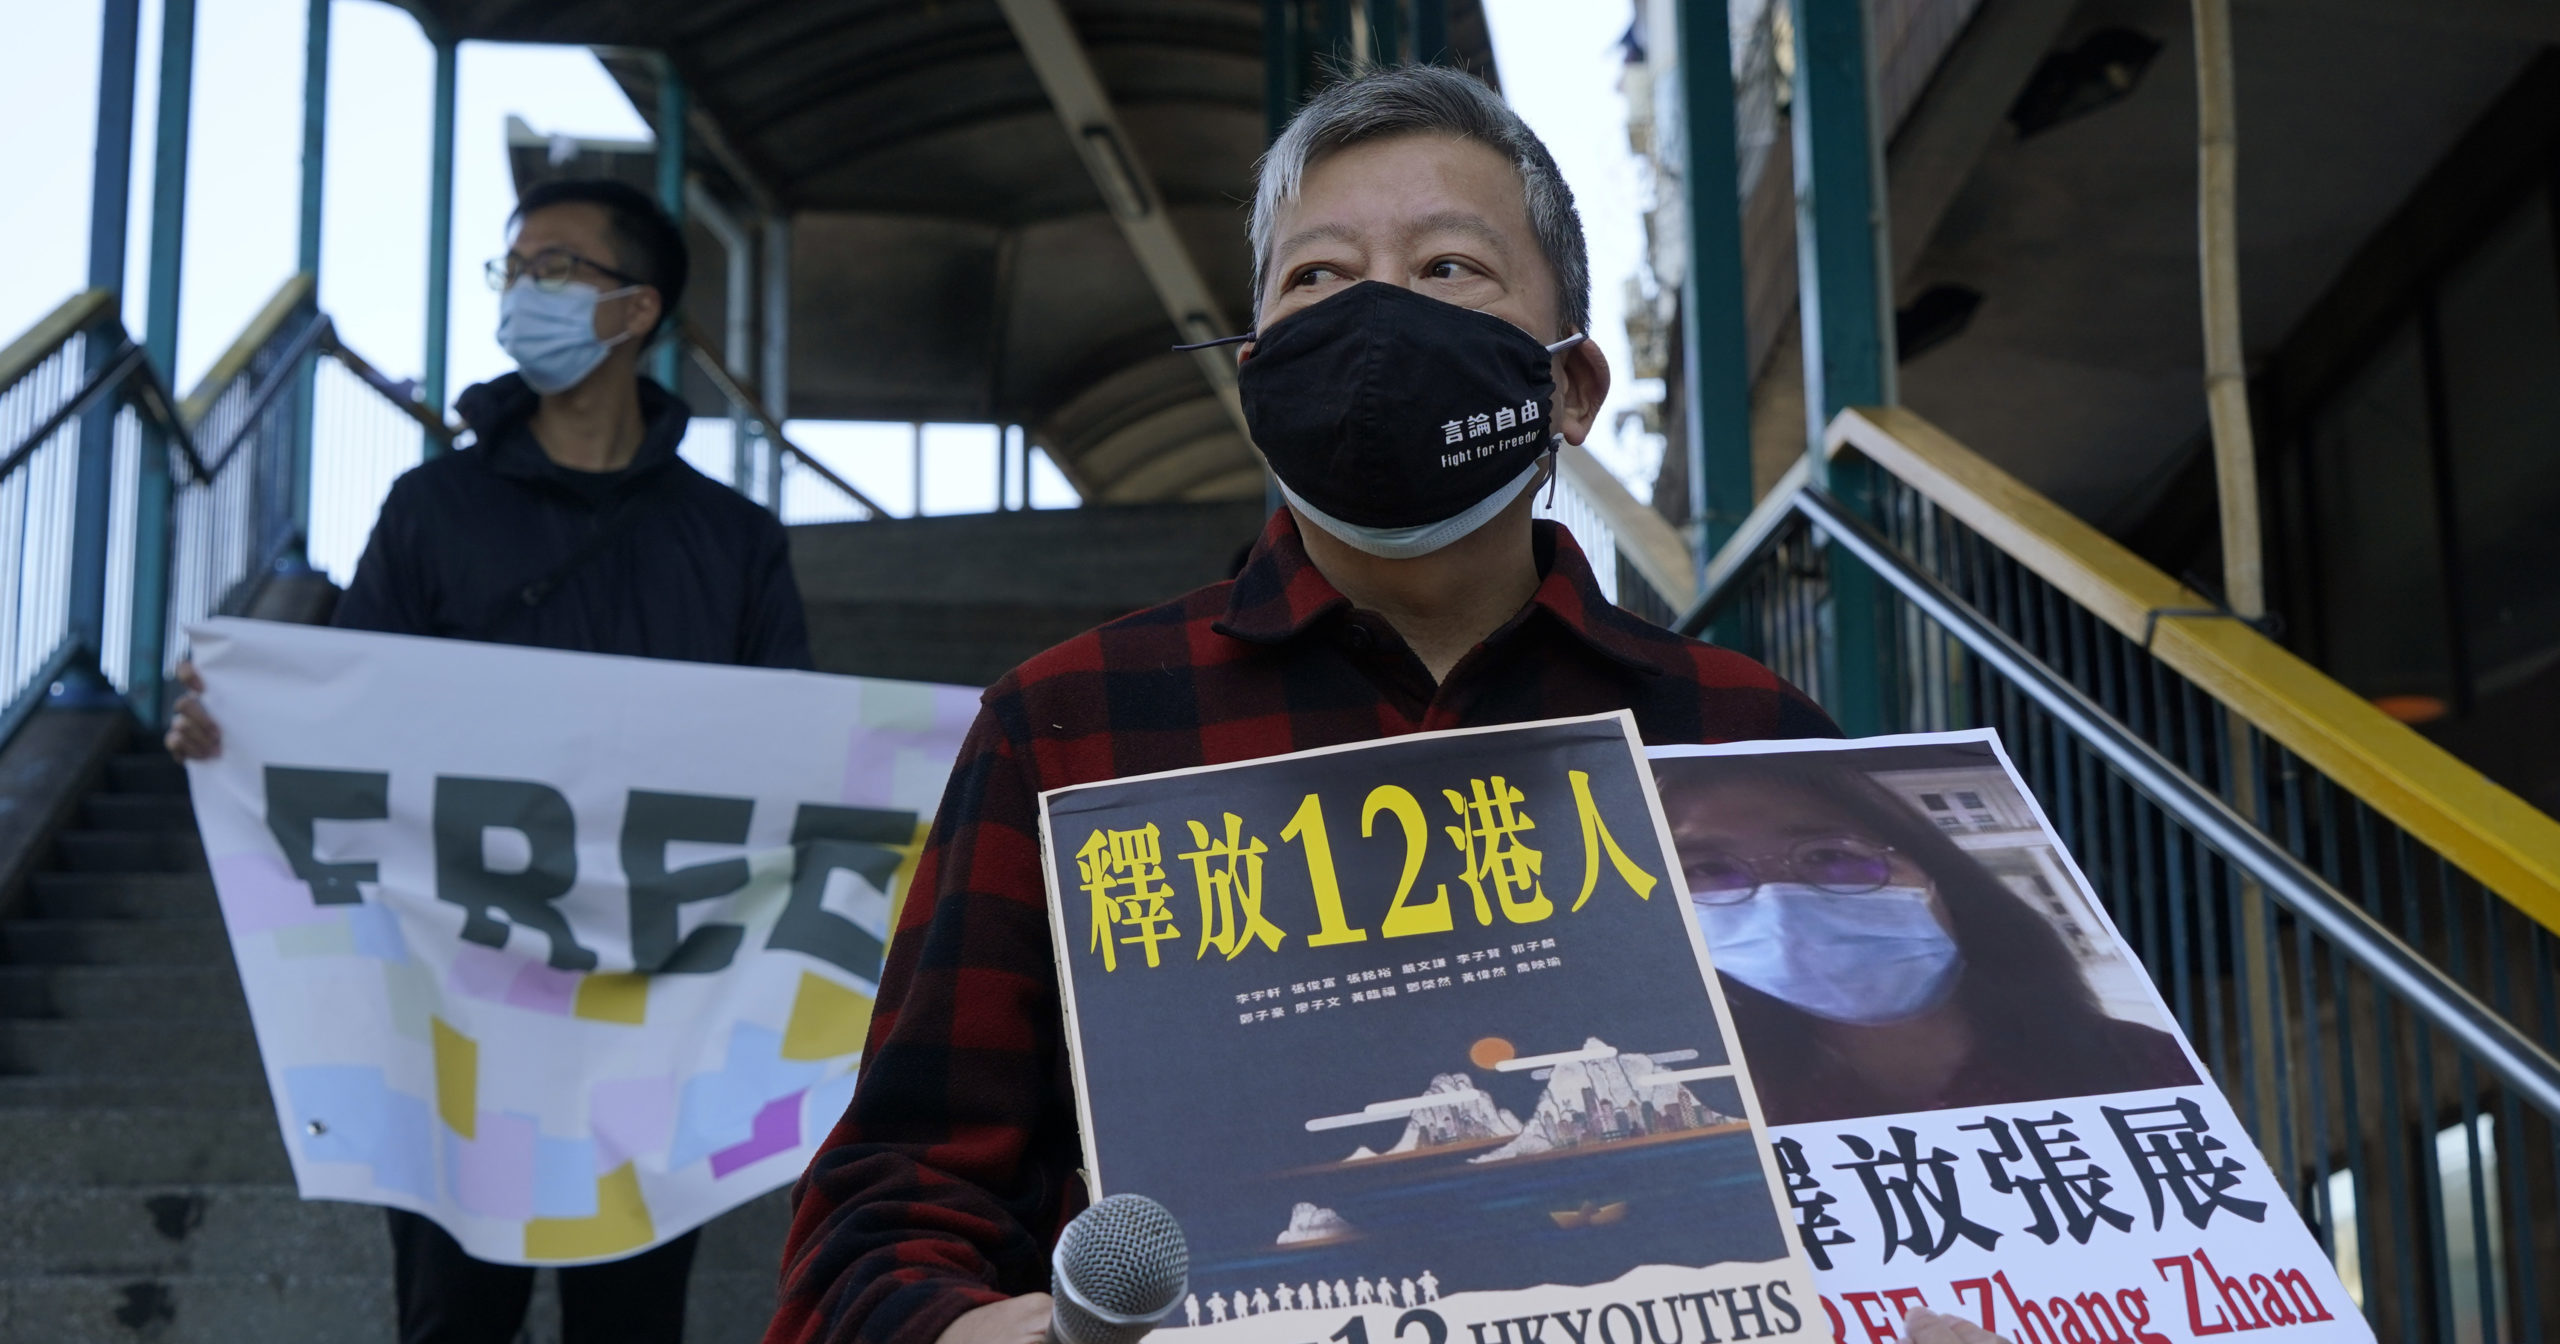 Pro-democracy activists hold placards as they march to the Chinese central government's liaison office in Hong Kong on Dec. 28, 2020.